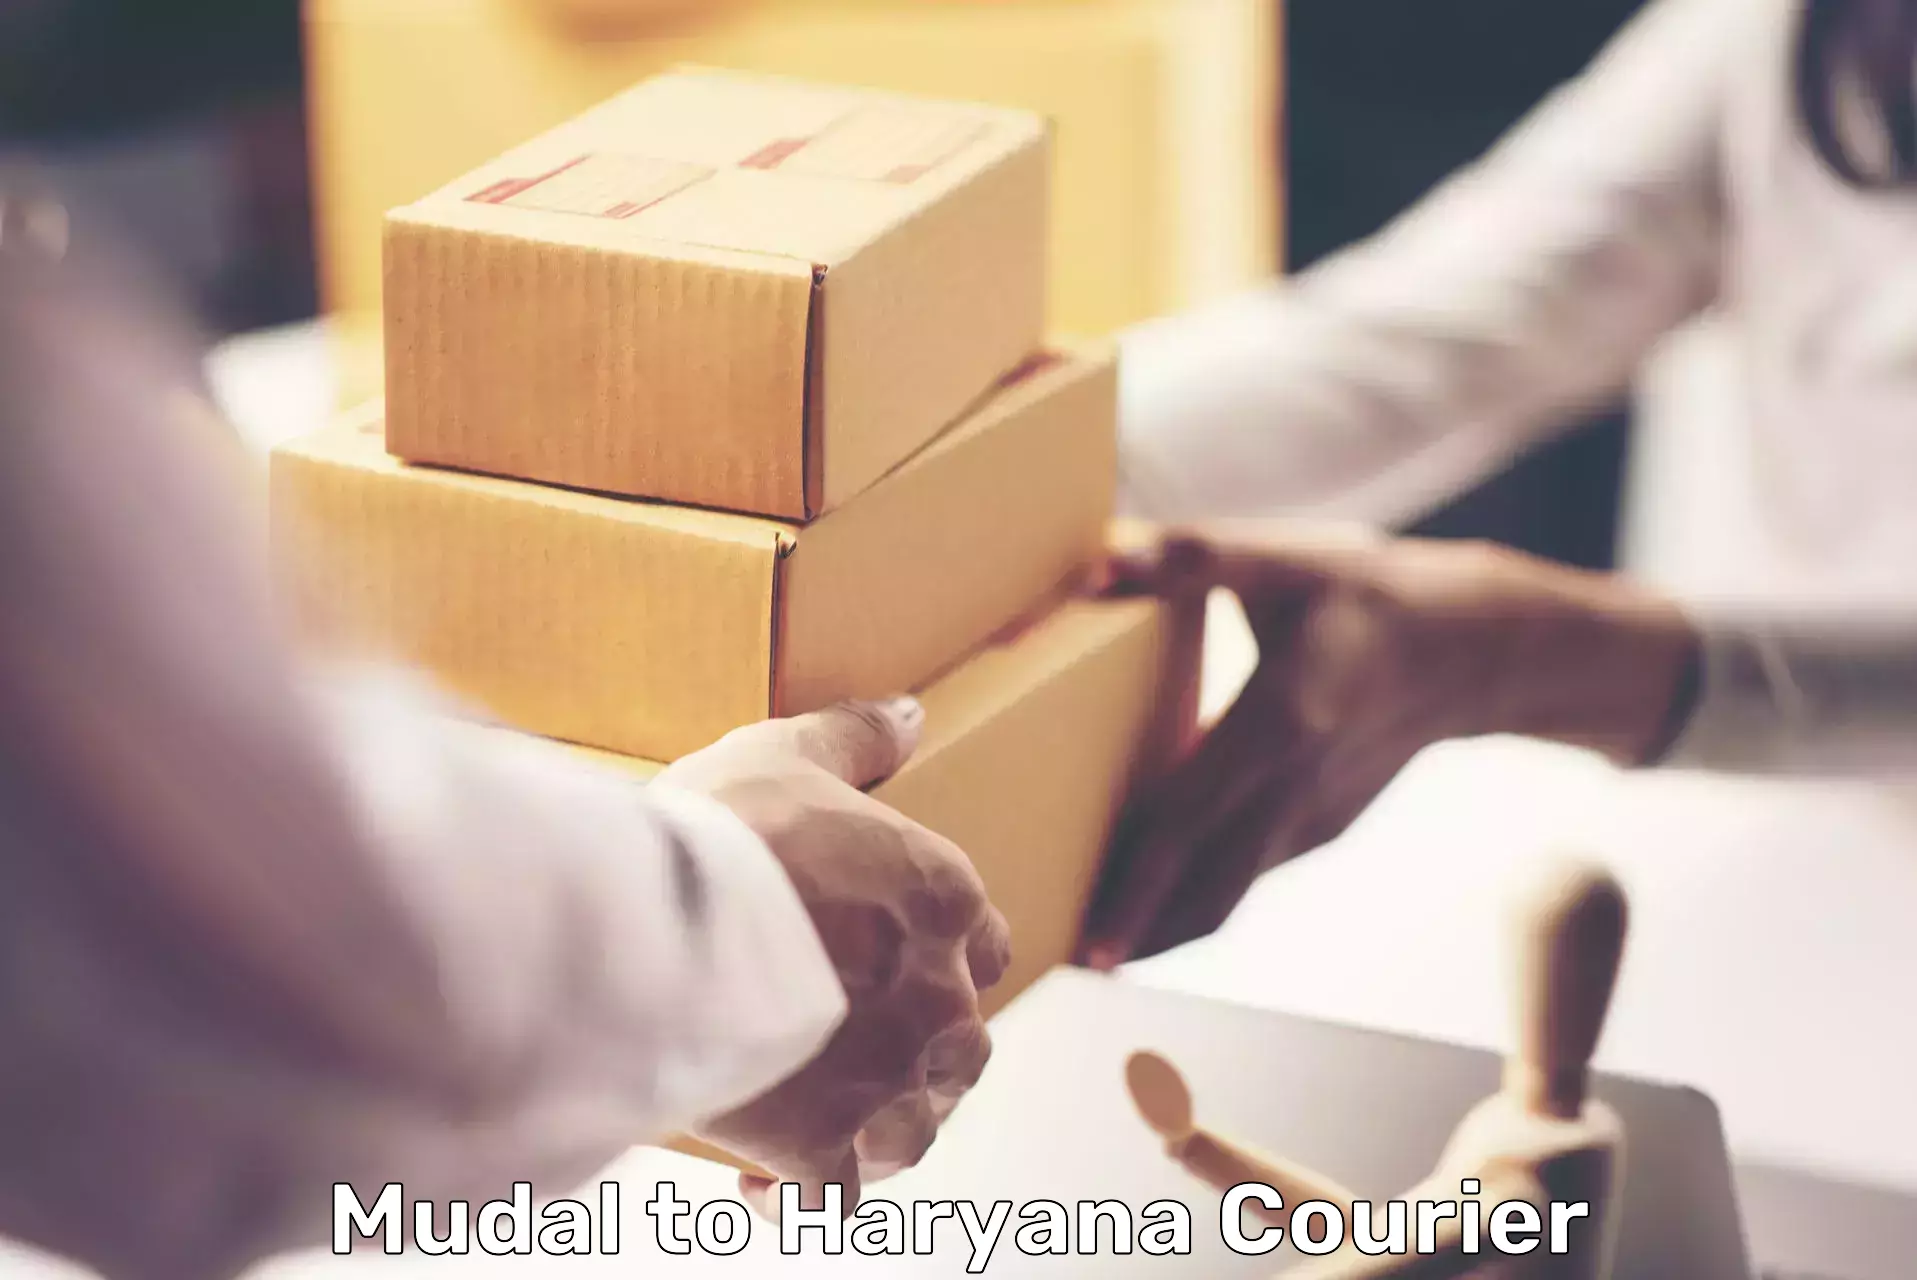 Nationwide parcel services Mudal to Haryana